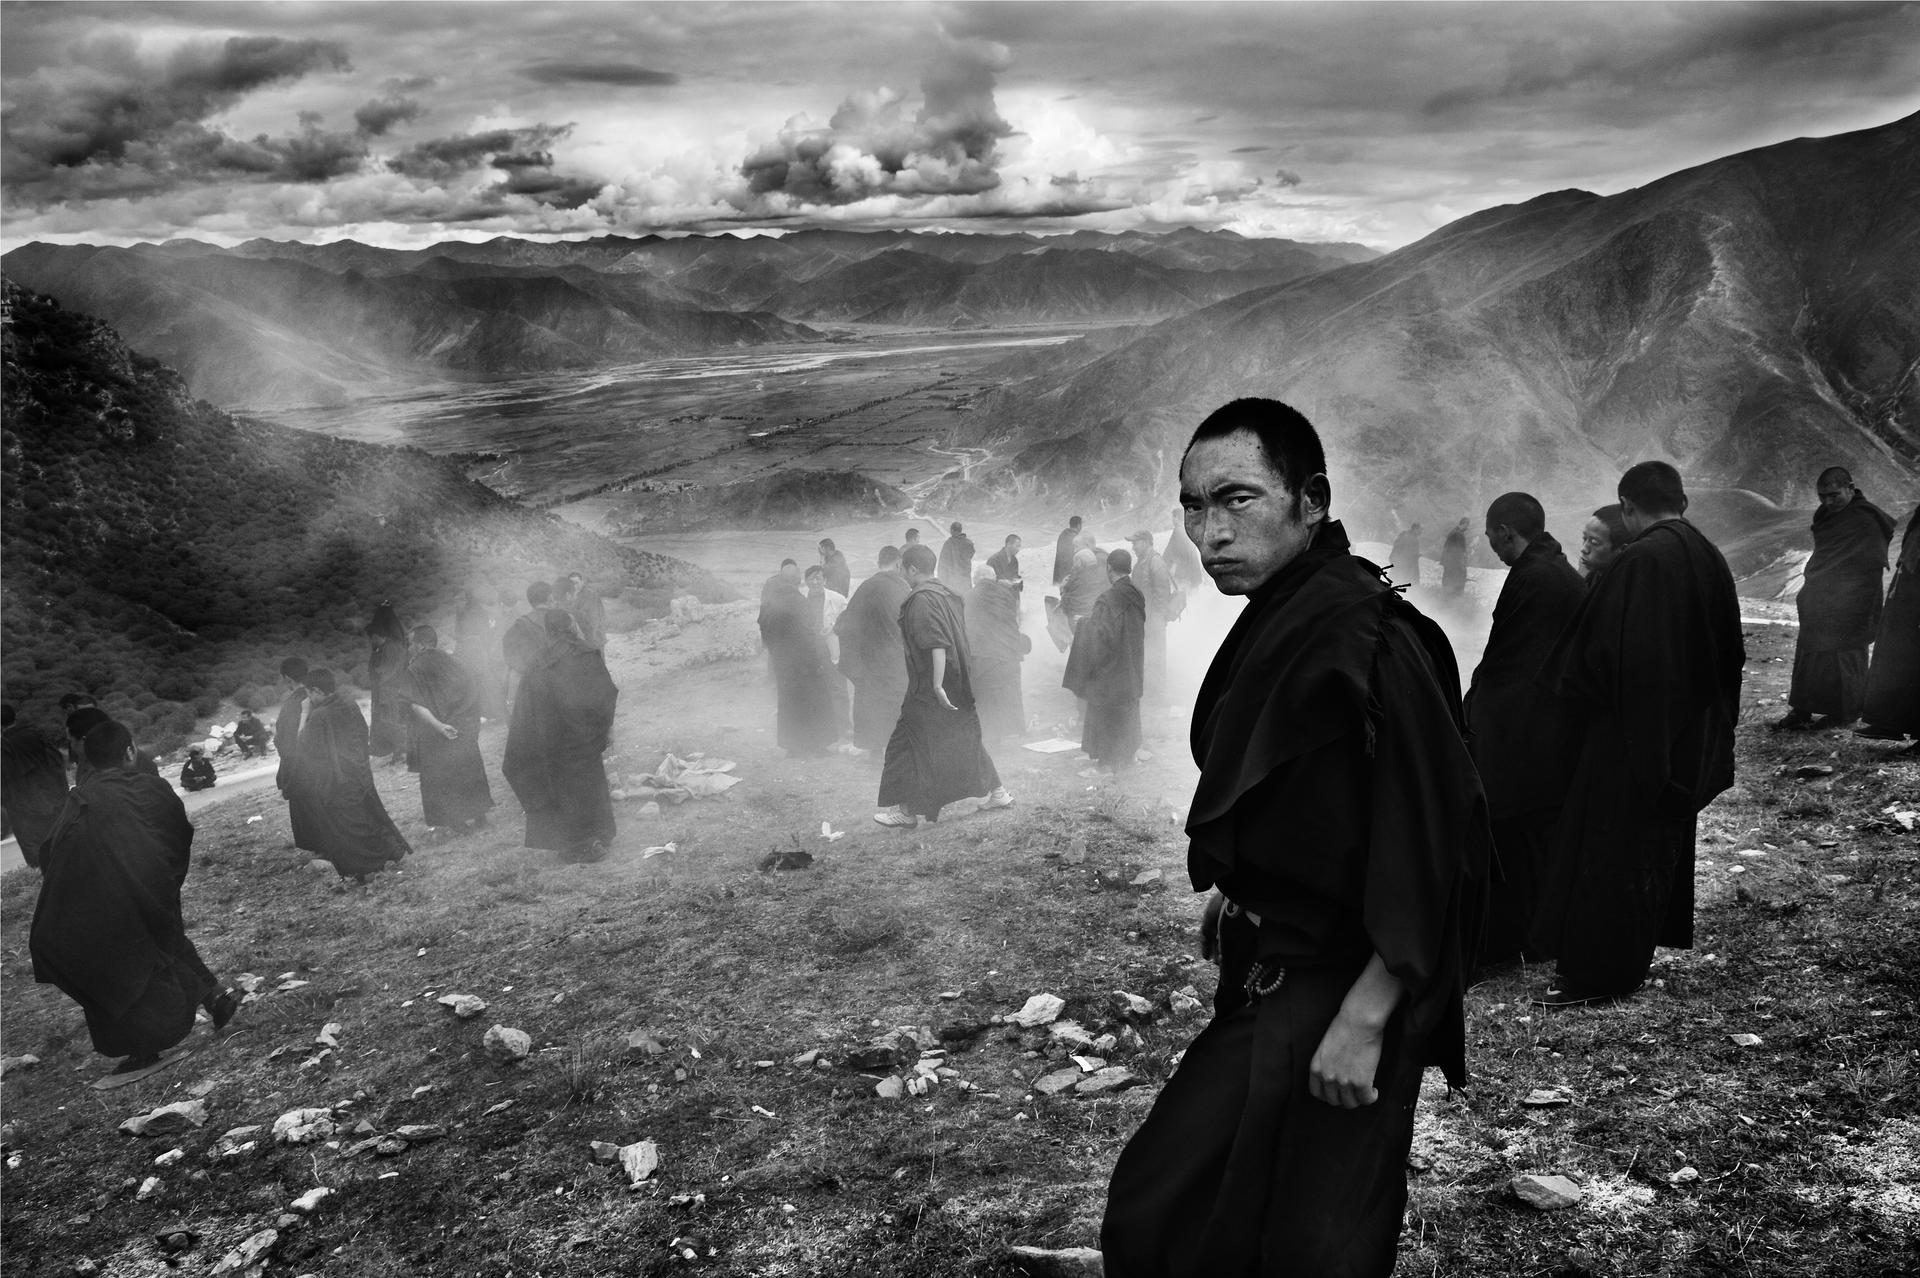 Tibet's monasteries that were torn down 35 years ago were rebuilt by monks using materials paid for by the public treasury. Photo: Laurent Zylberman